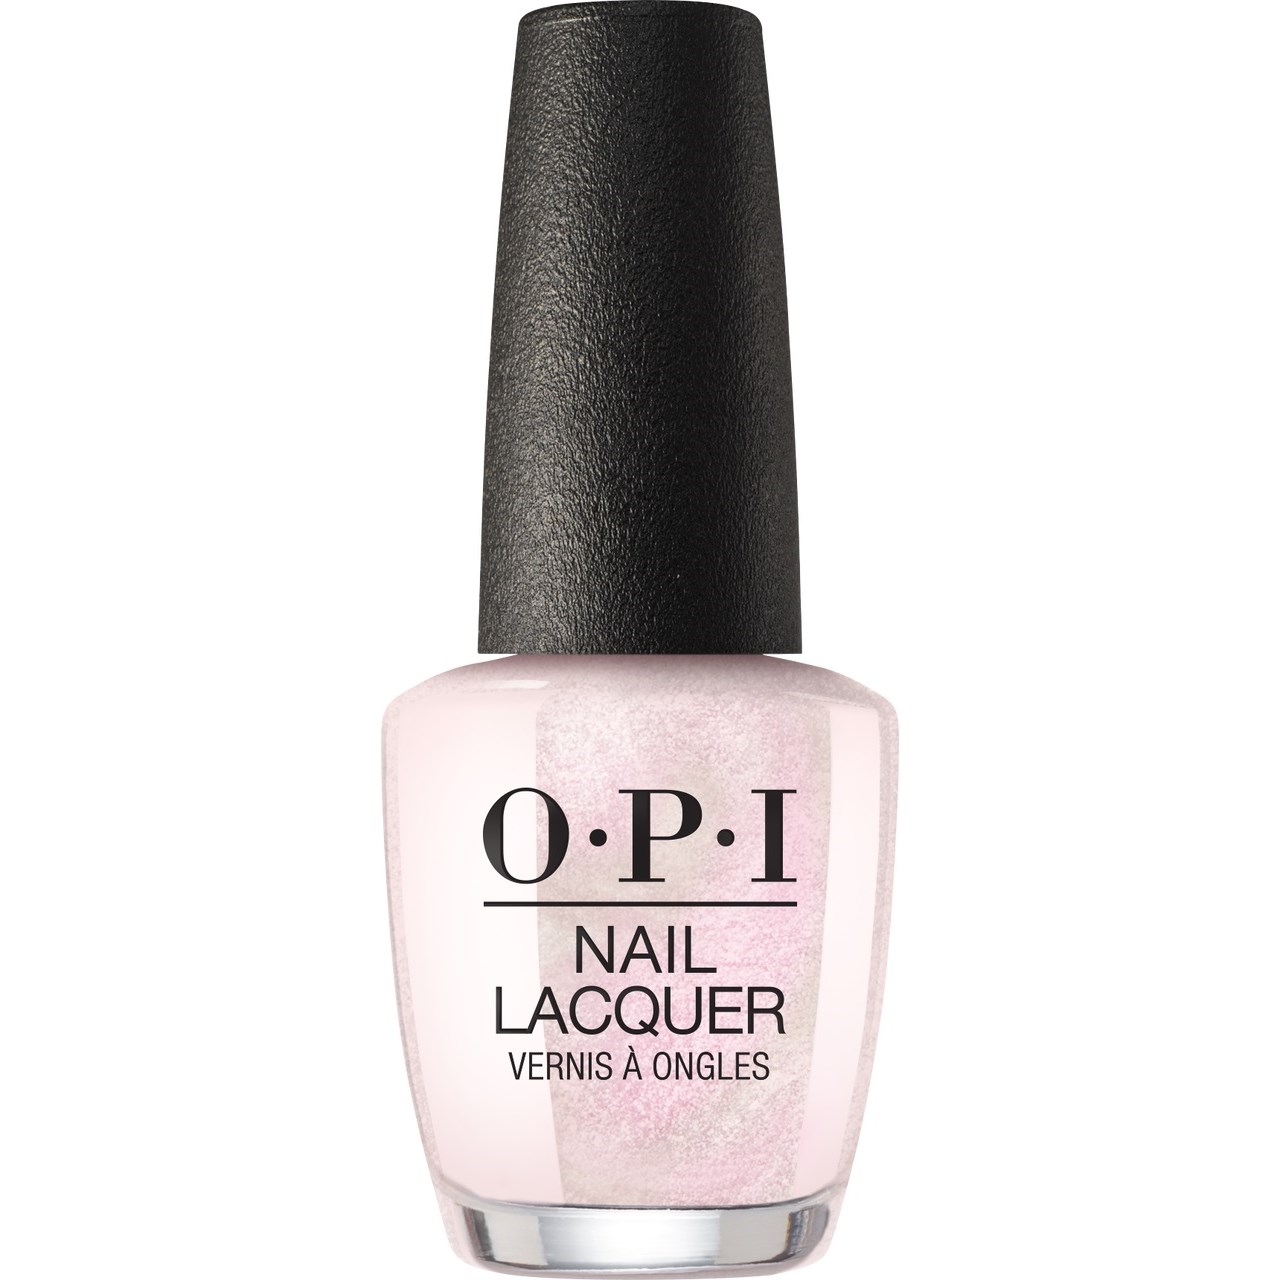 Bilde av Opi Nail Lacquer Always Bare For You Collection Nail Polish Throw Me A